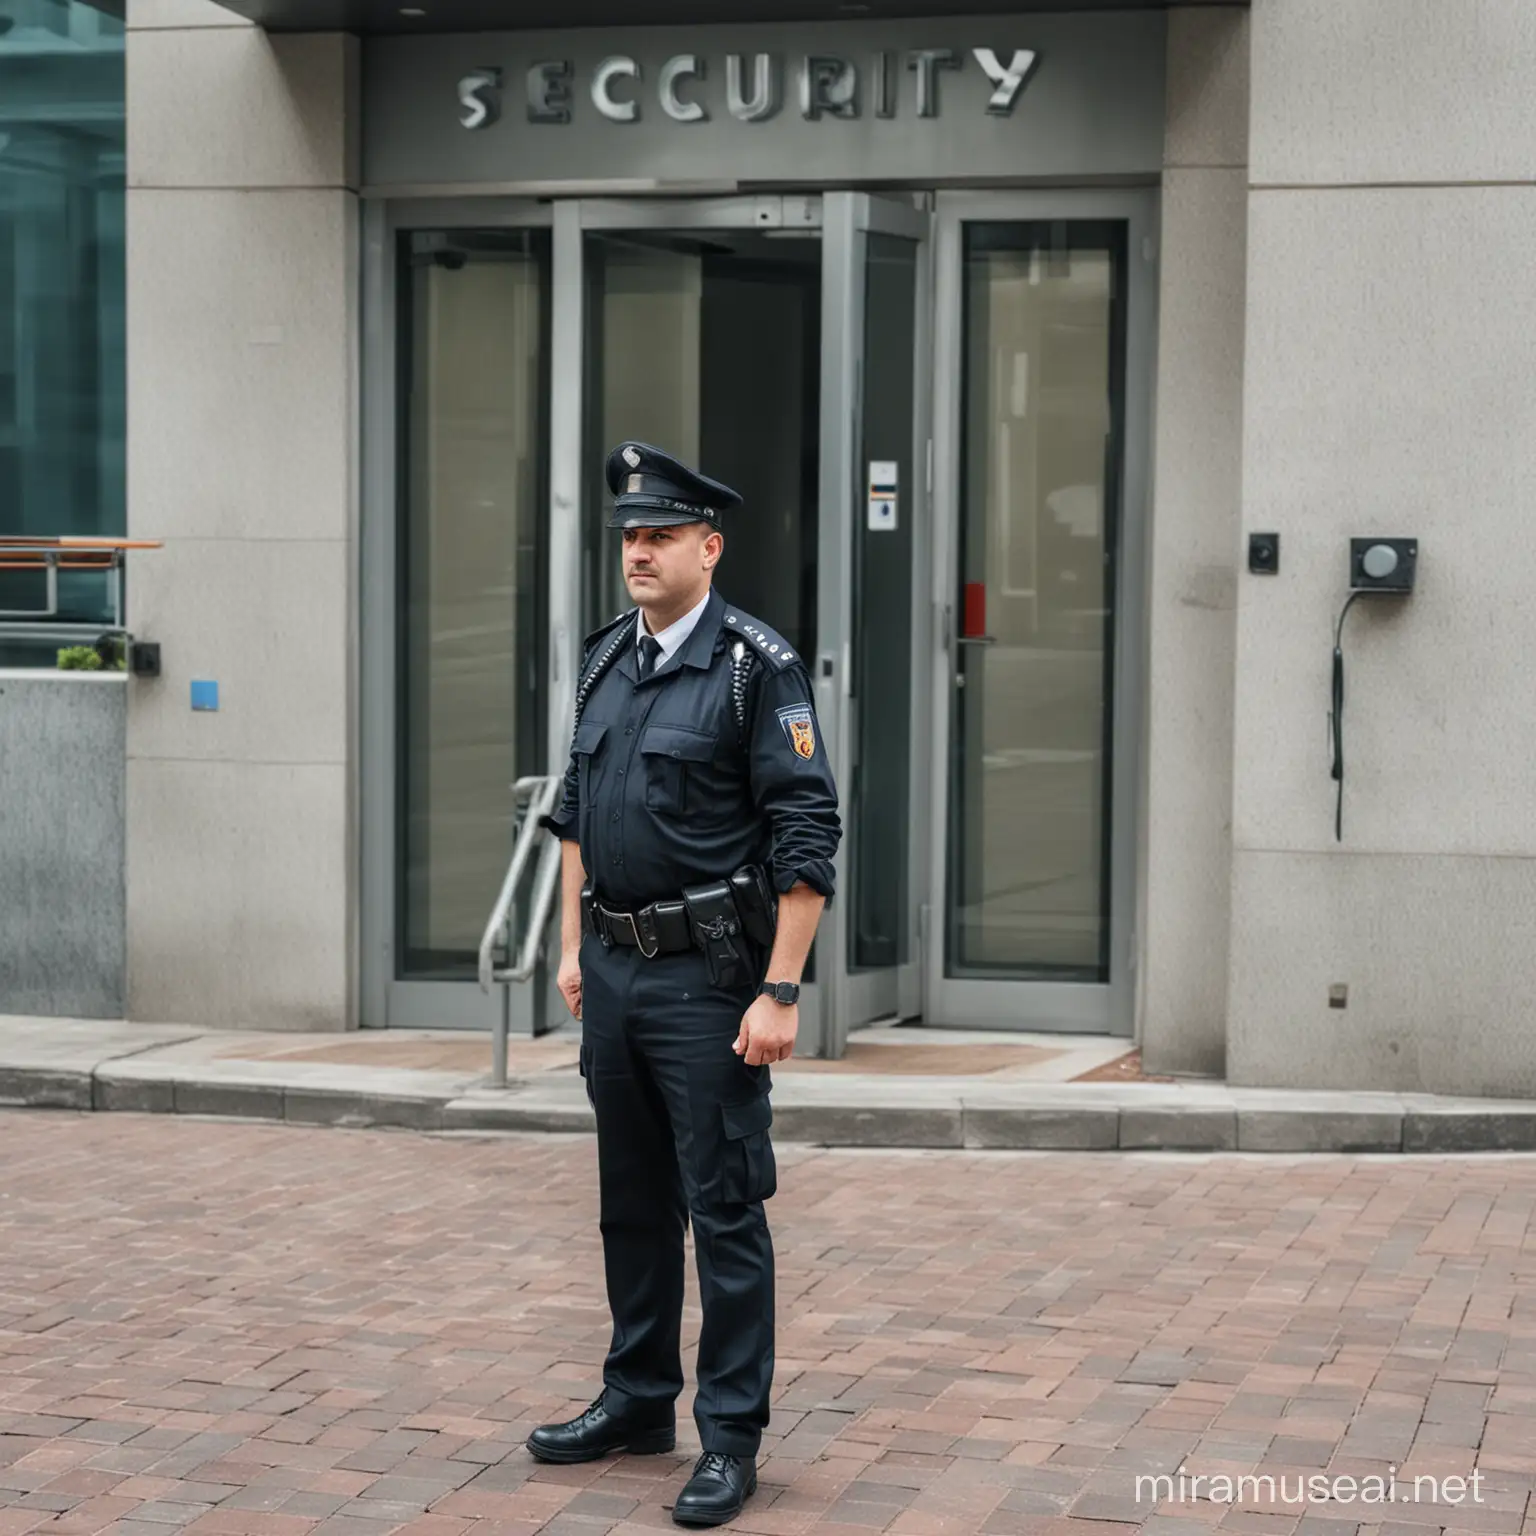 Diligent Security Guard Ensuring Safety at Corporate Entry and Exit Points